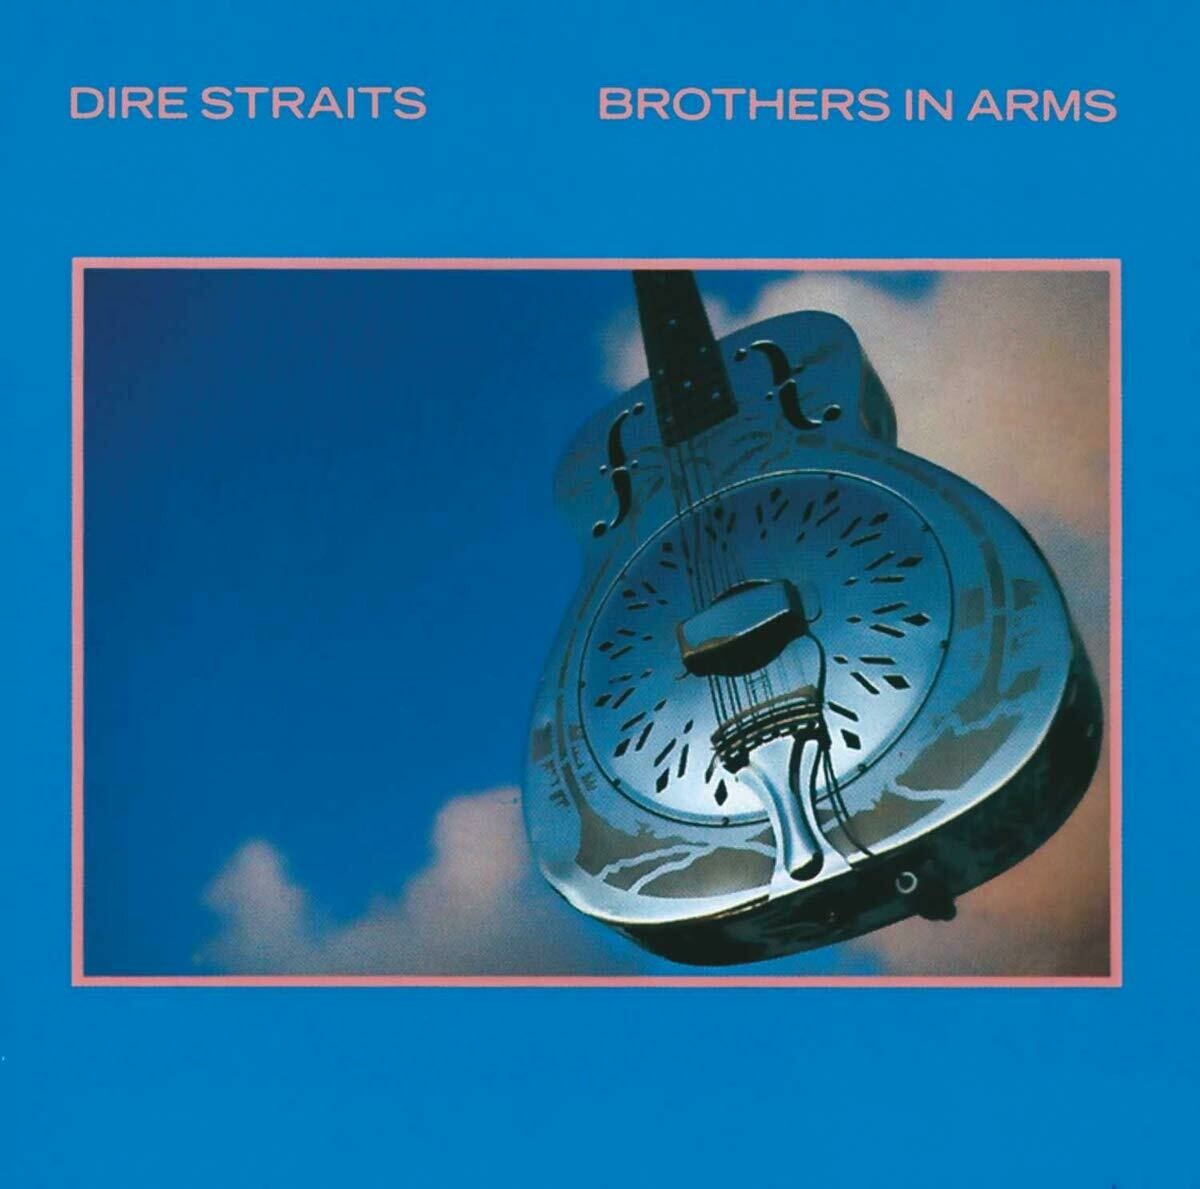 Dire Straits "Brothers In Arms"